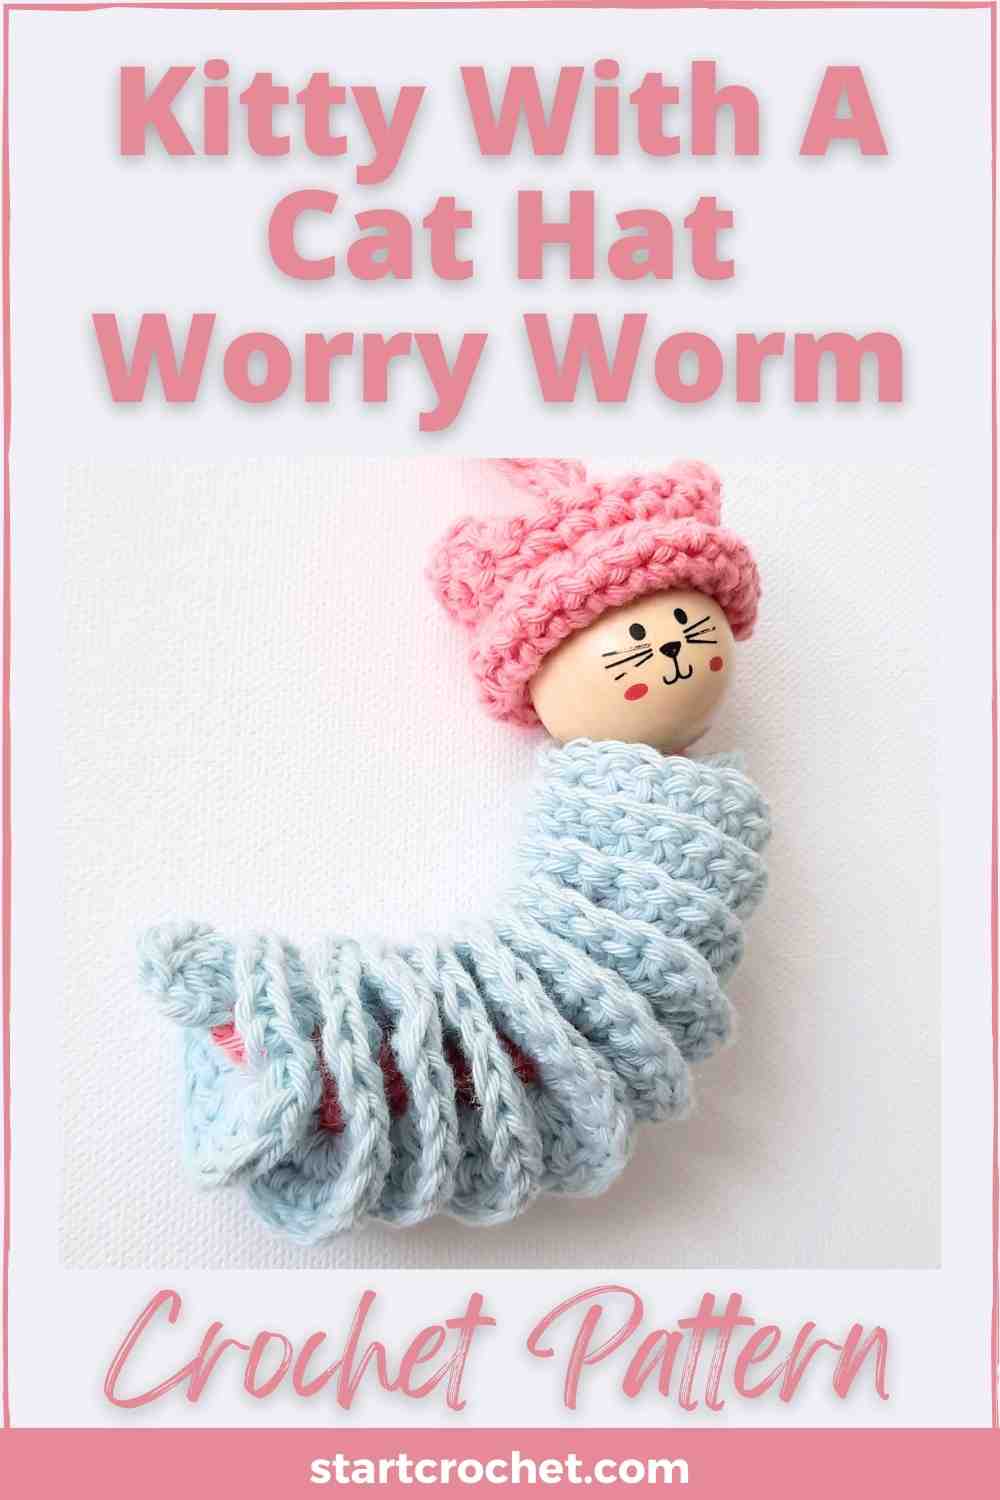 Kitty With A Cat Hat Worry Worm With Wooden Head crochet pattern